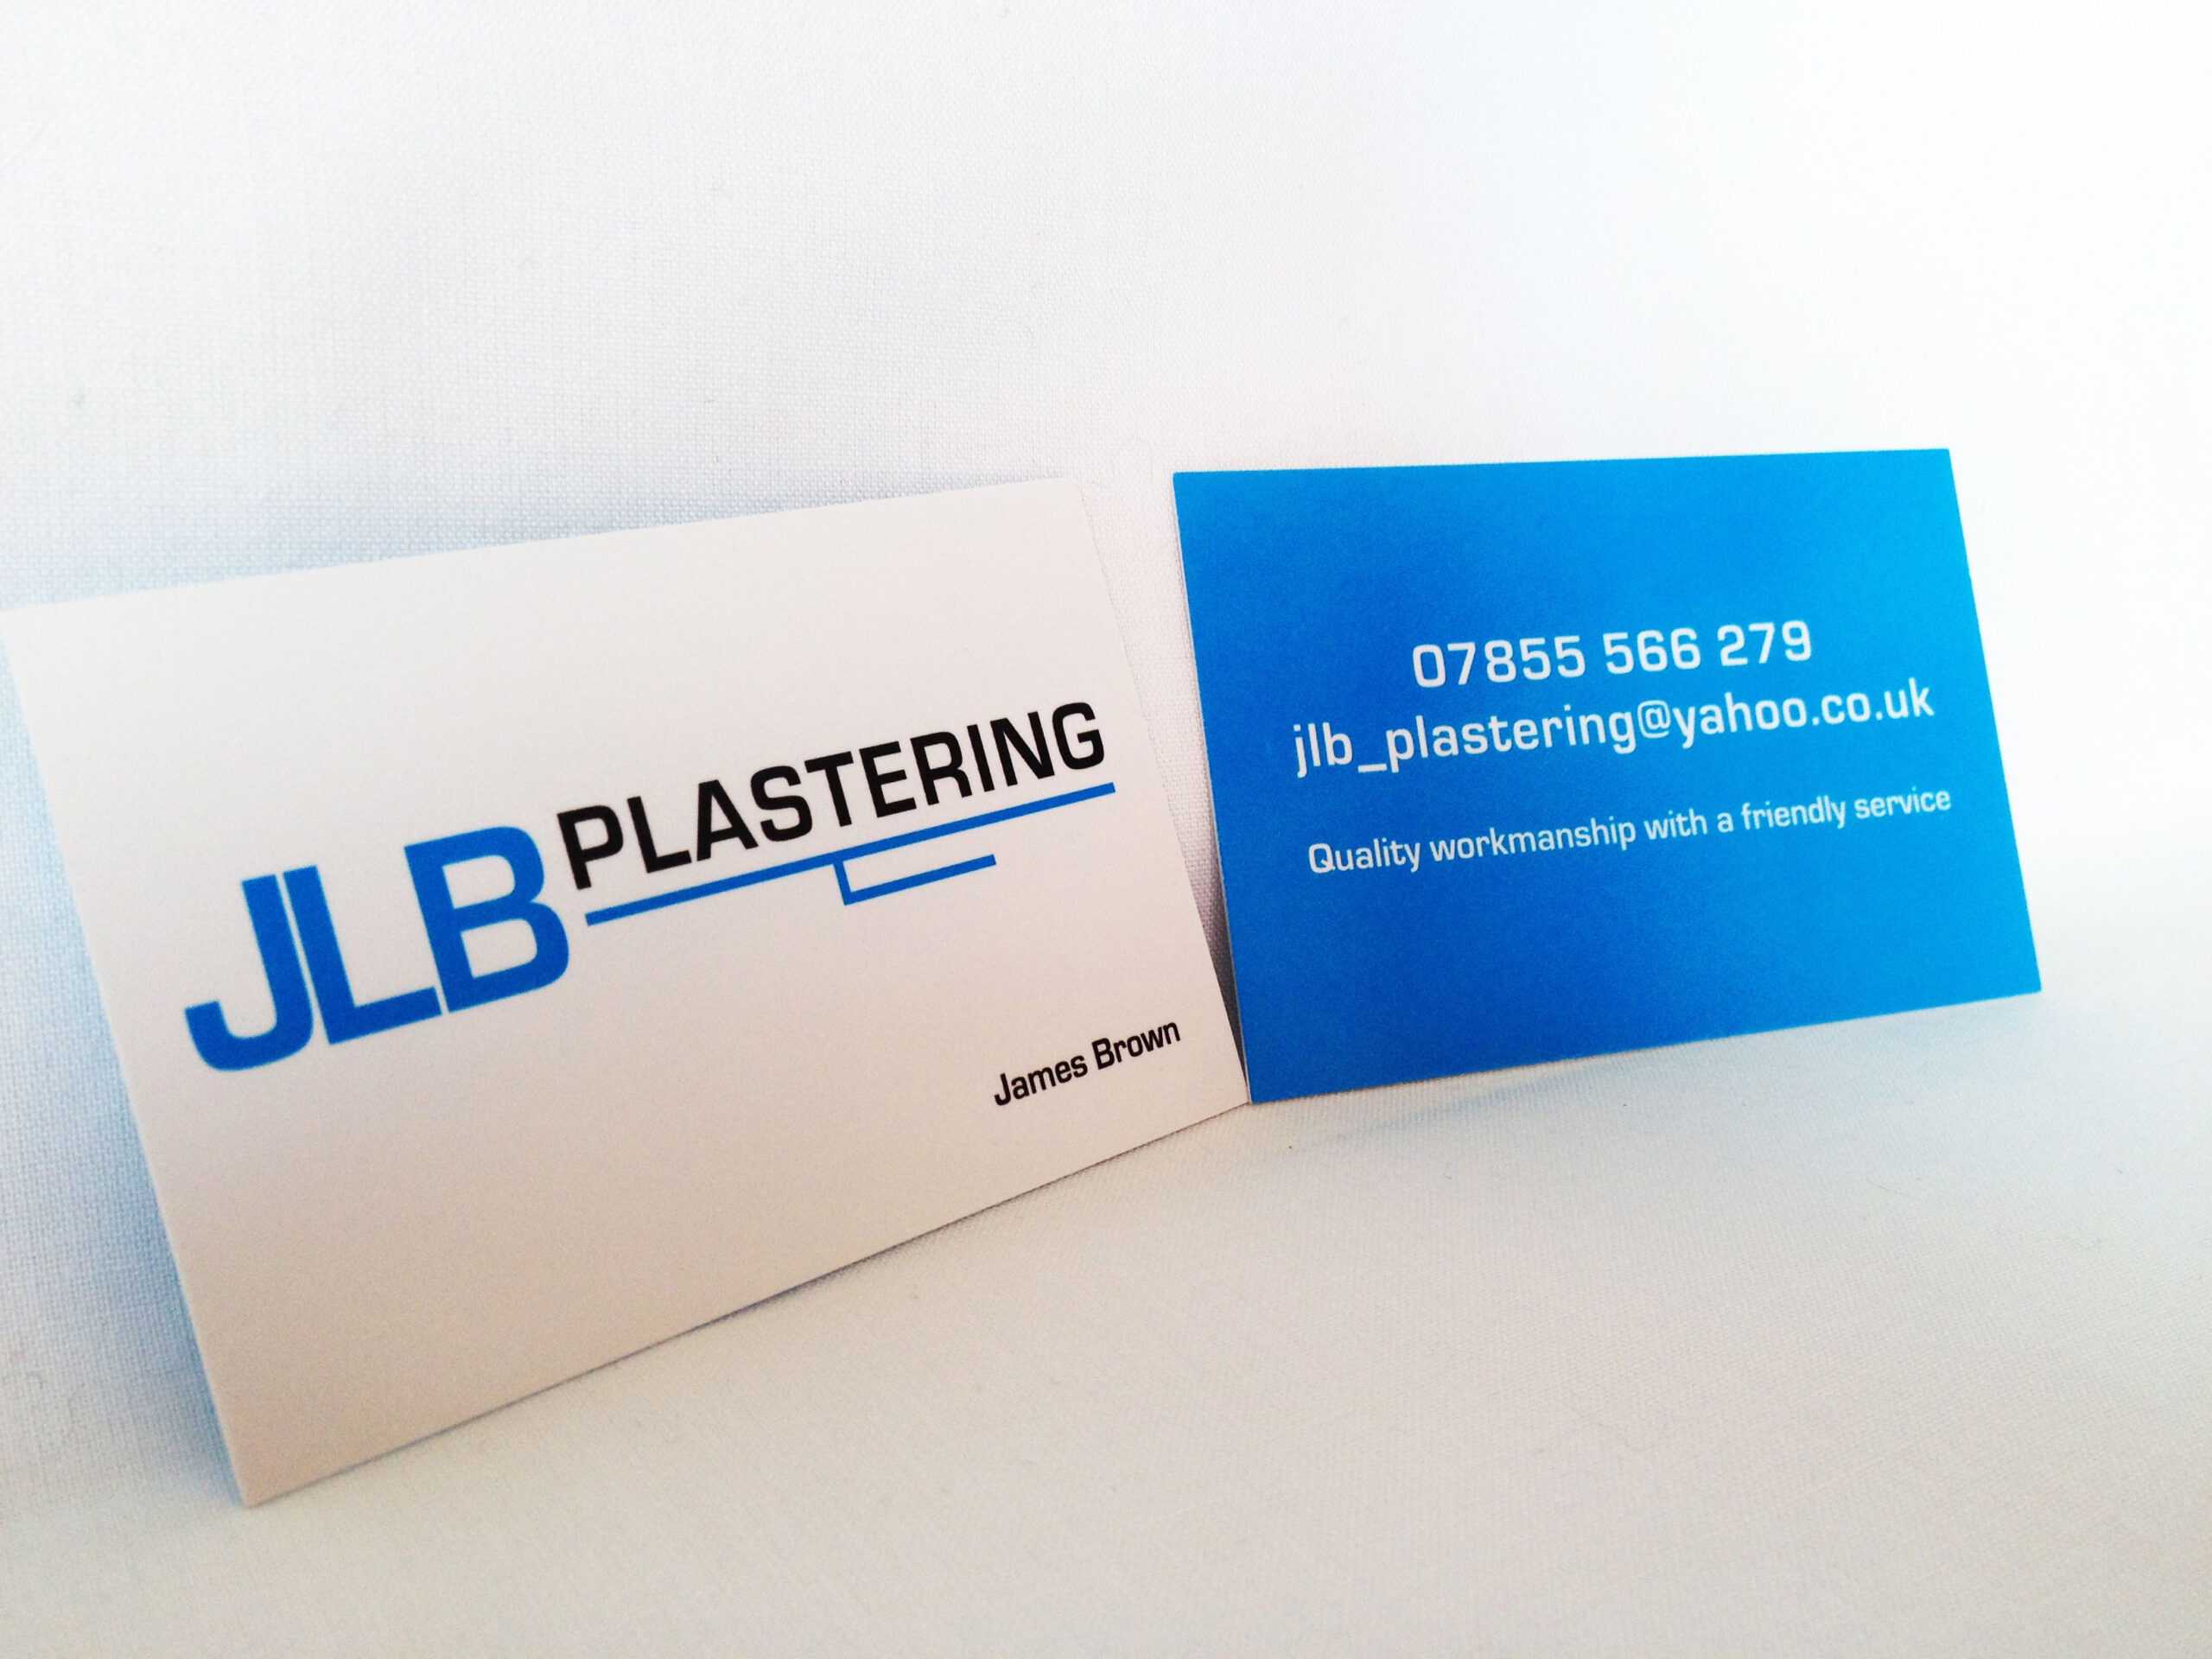 New Jlb Plastering Business Cards And Logo Design Pertaining To Plastering Business Cards Templates